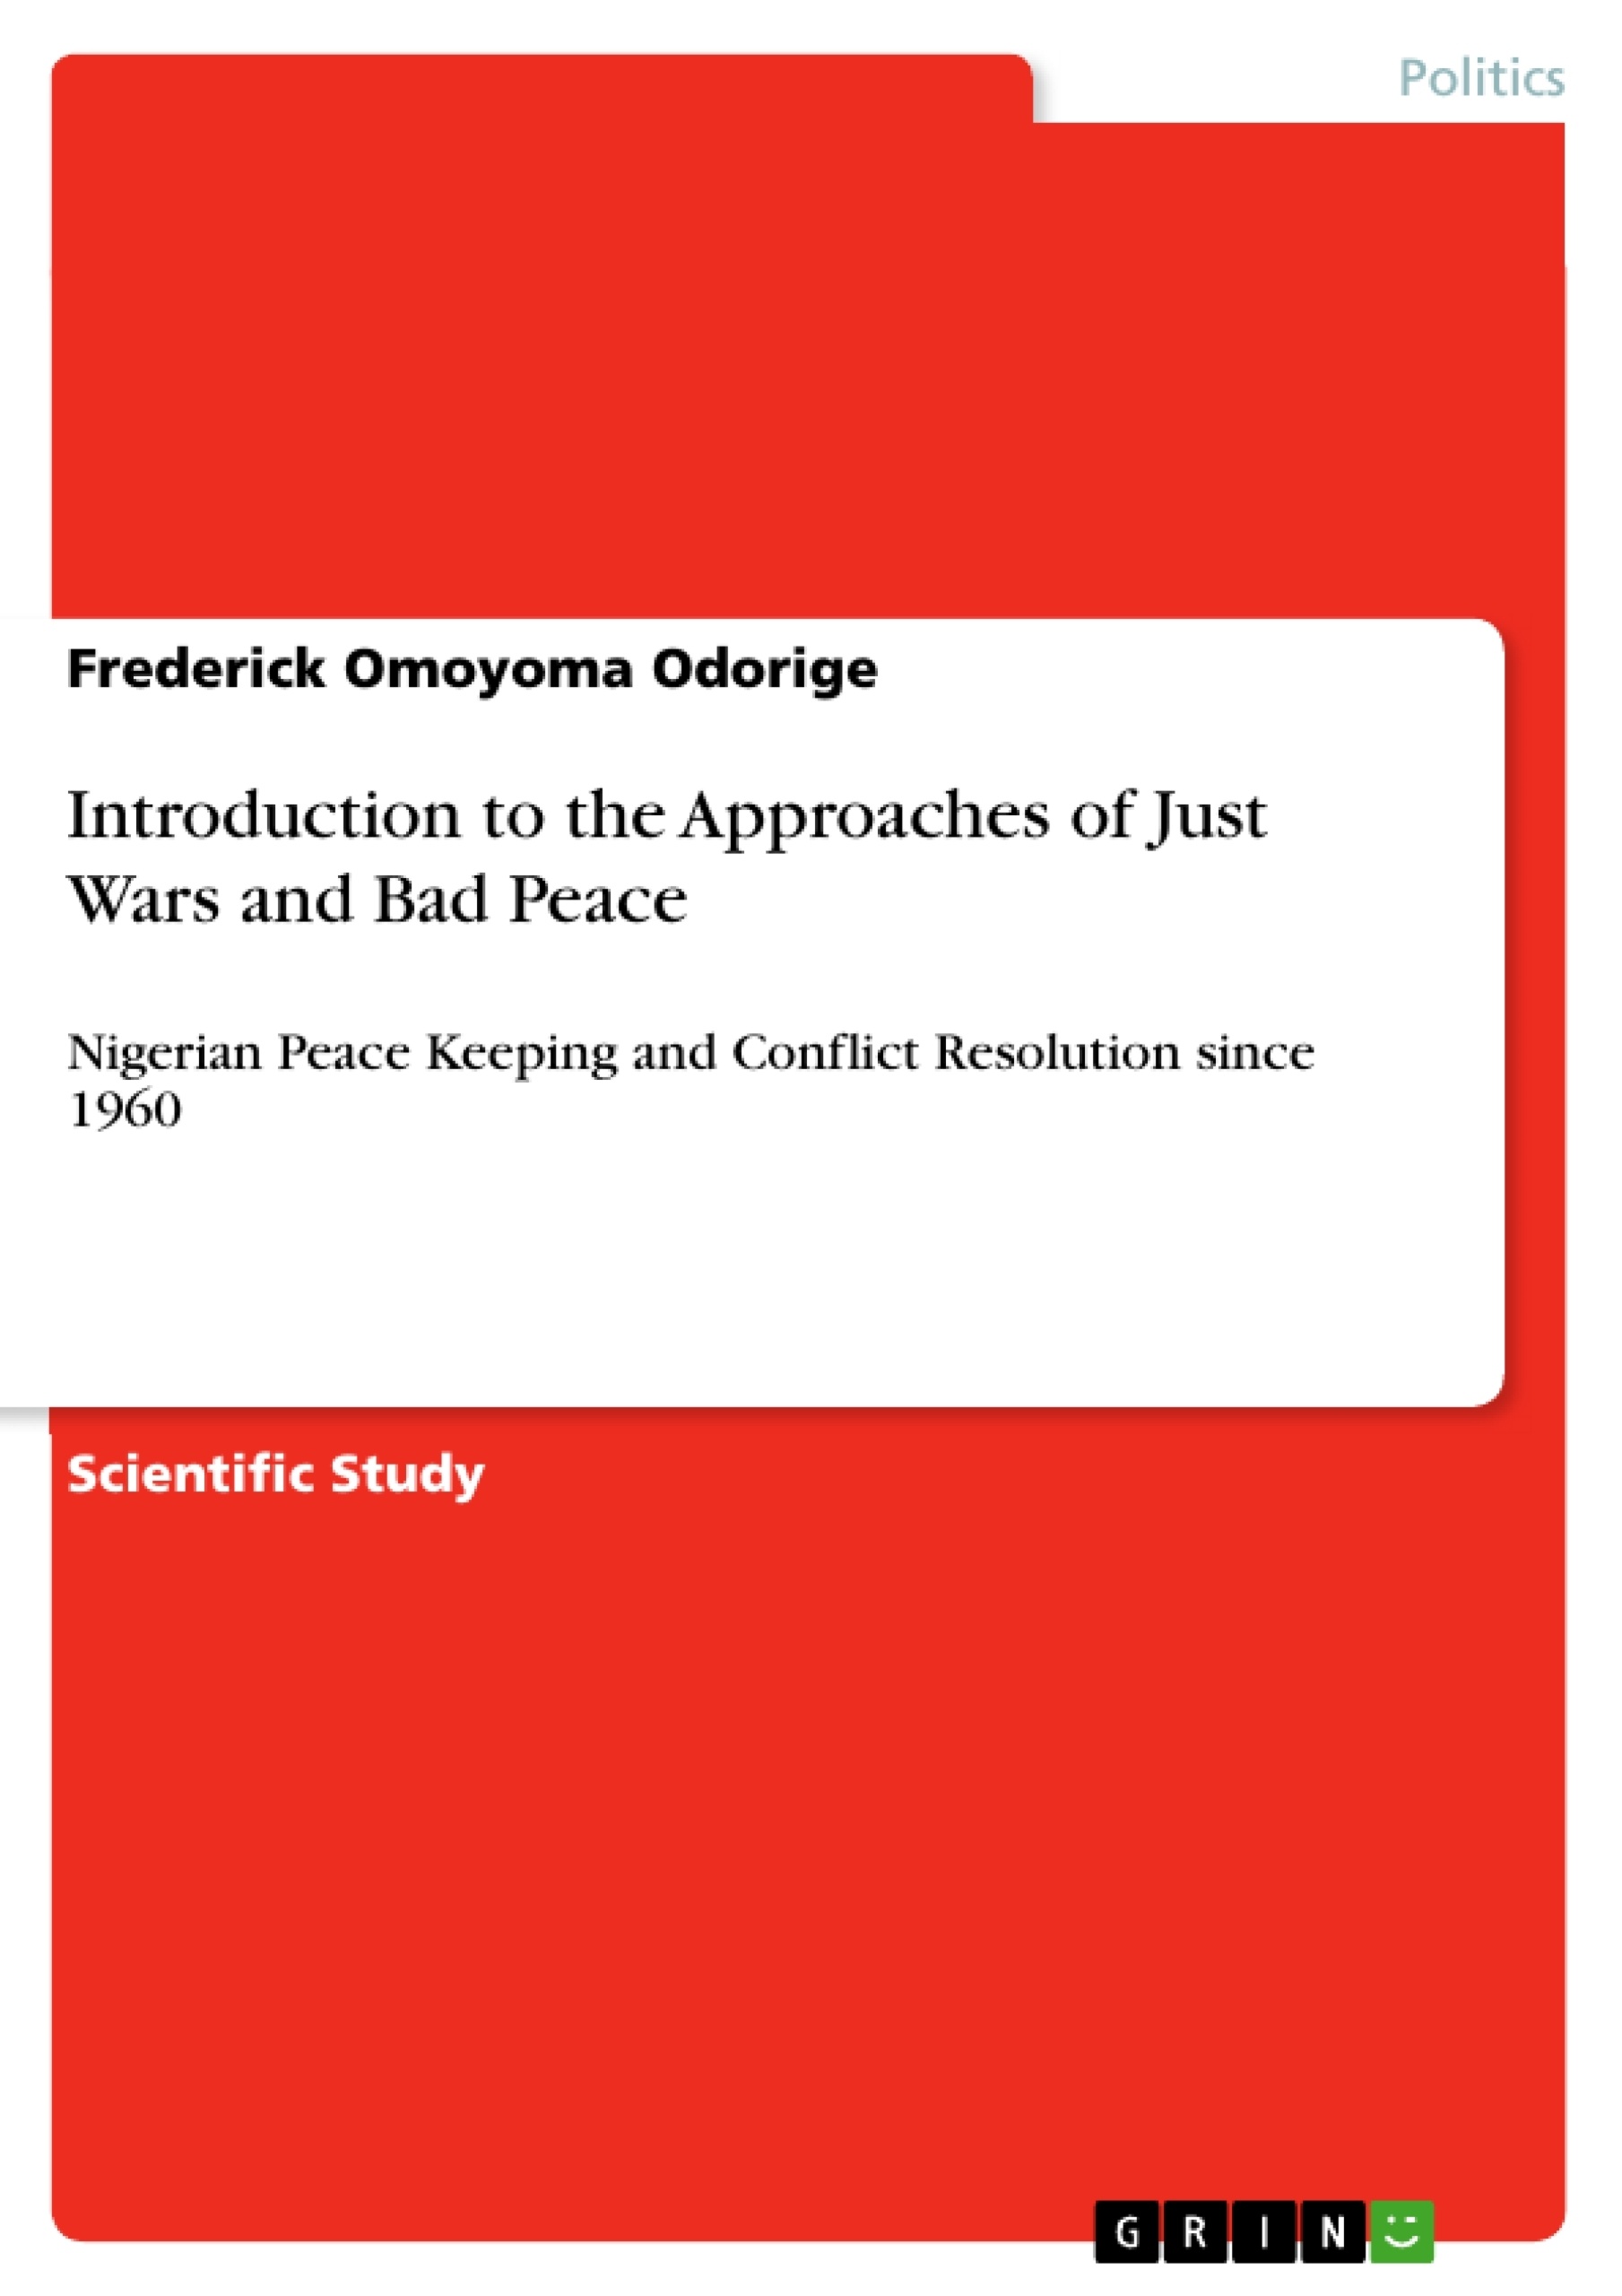 Título: Introduction to the Approaches of Just Wars and Bad Peace